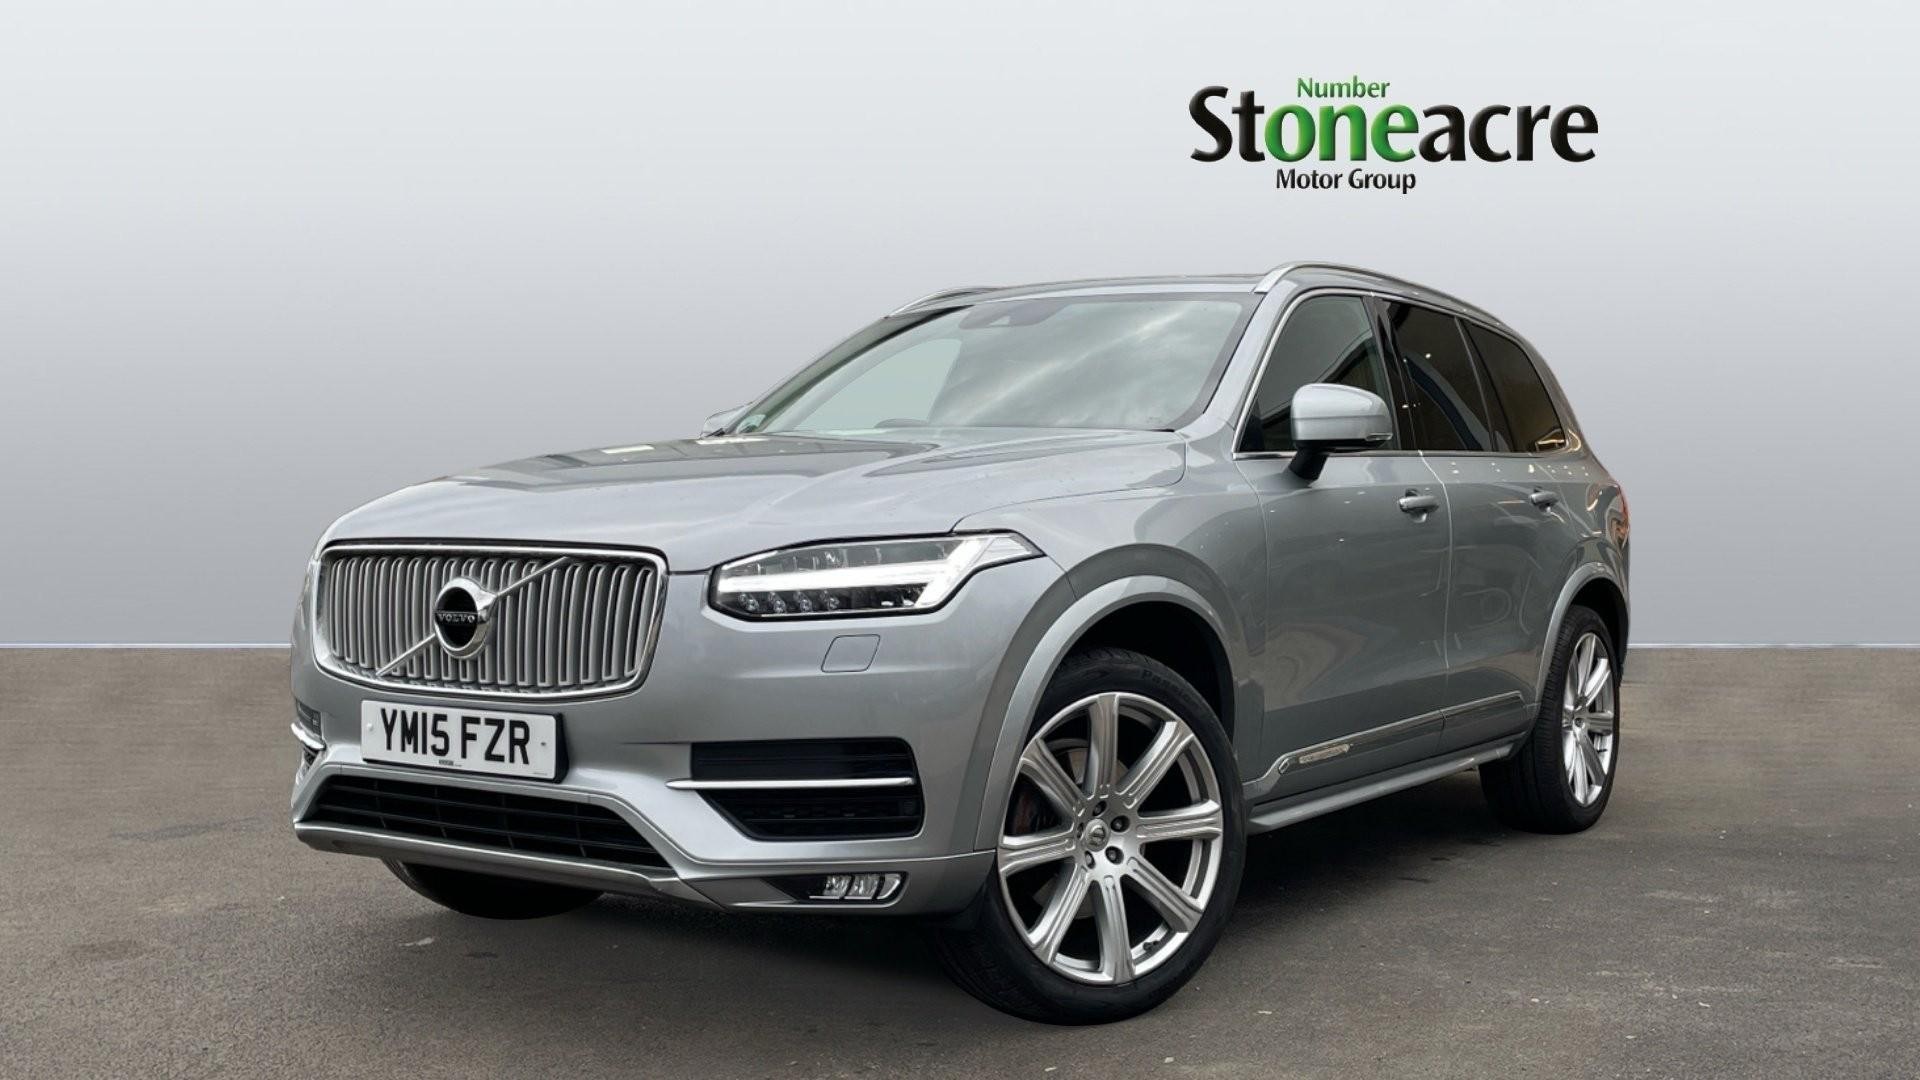 Volvo XC90 2.0 D5 Inscription 5dr AWD Geartronic (YM15FZR) image 5